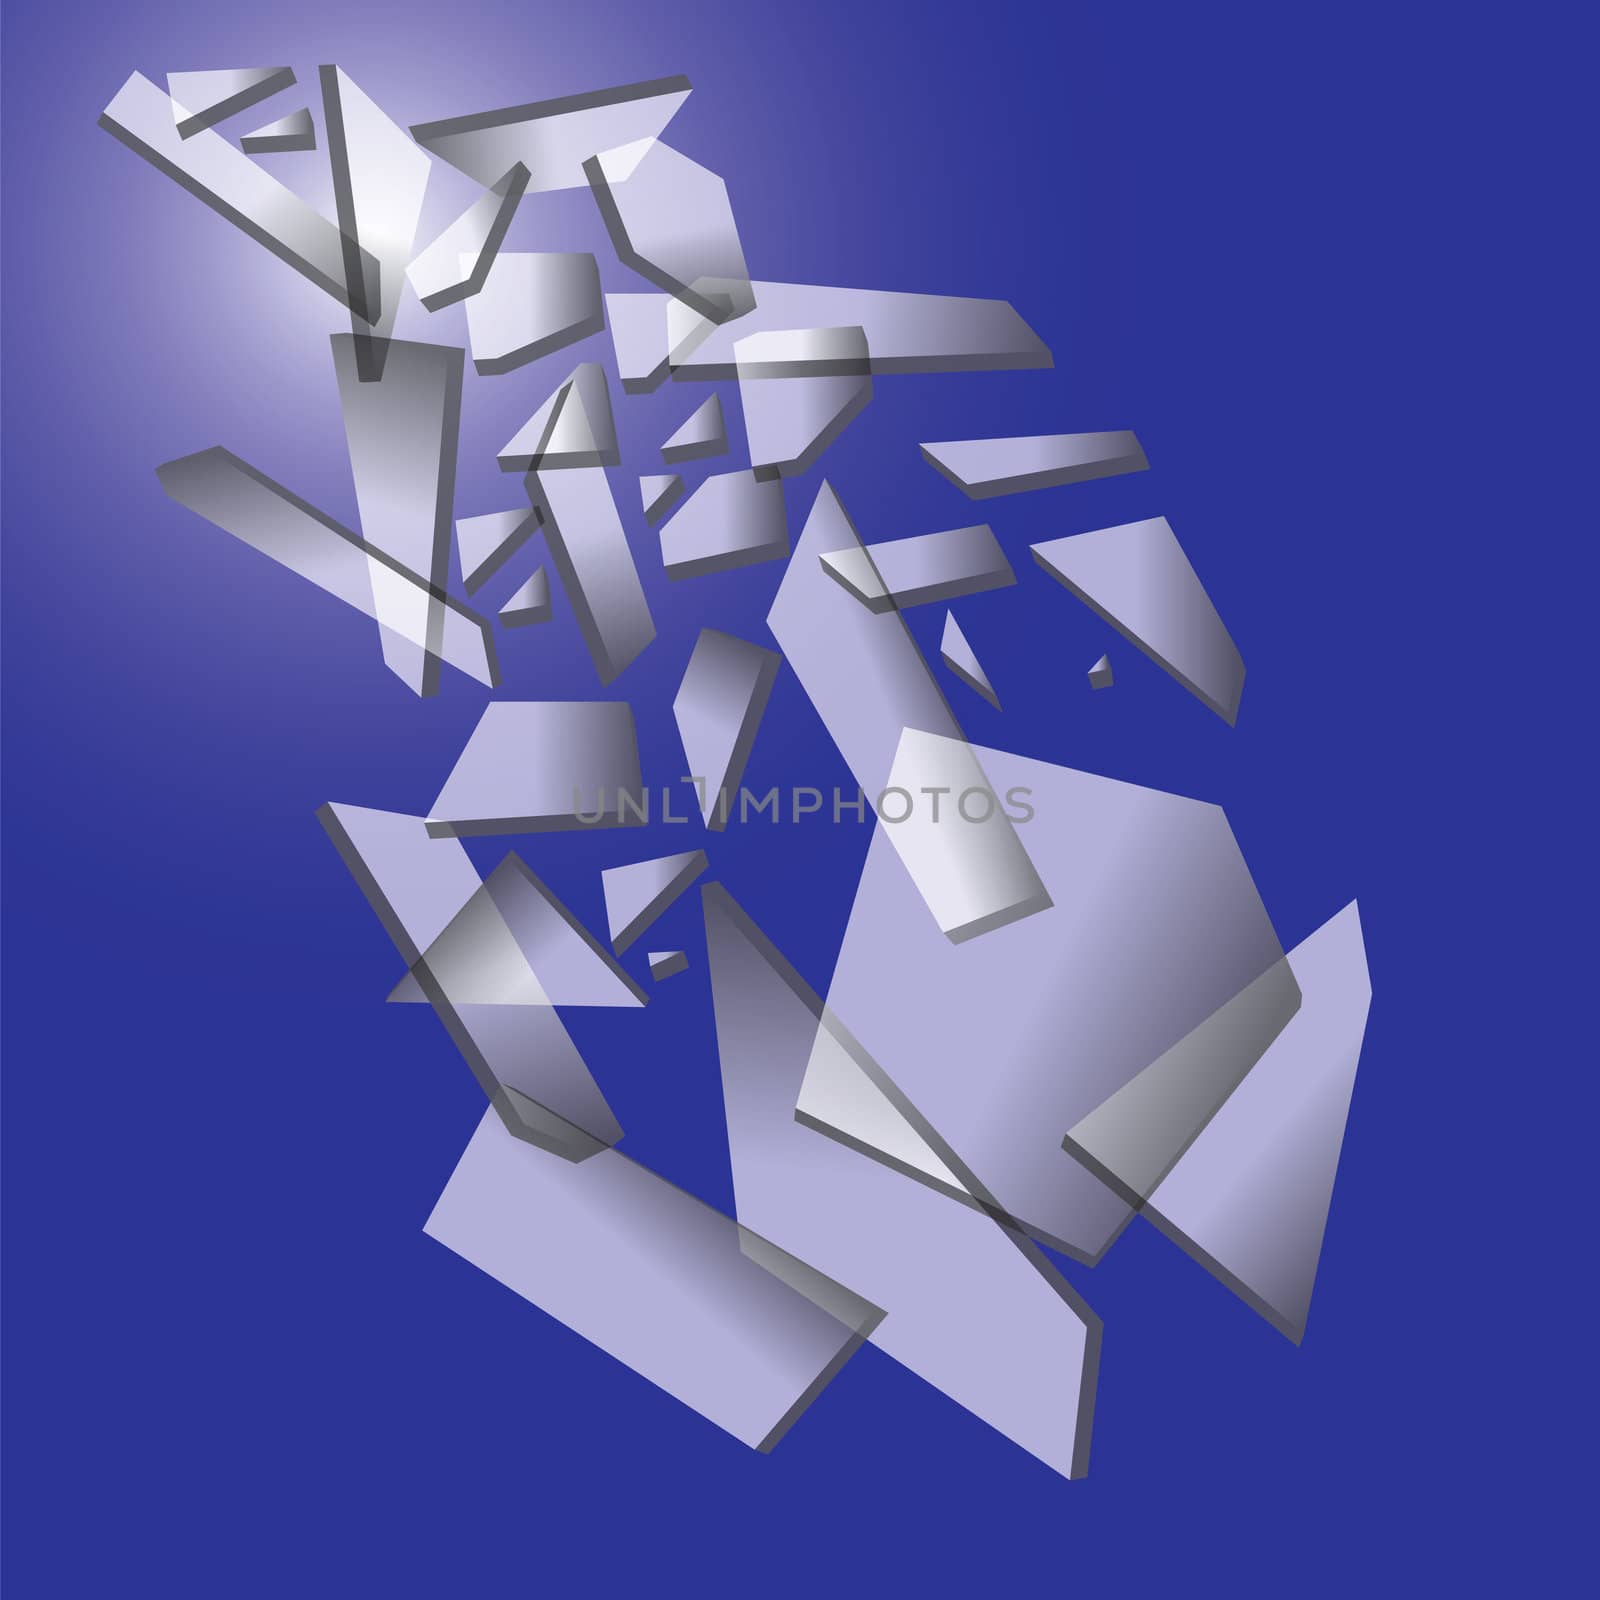 Falling pieces of broken glass on blue background. Vector illustration.